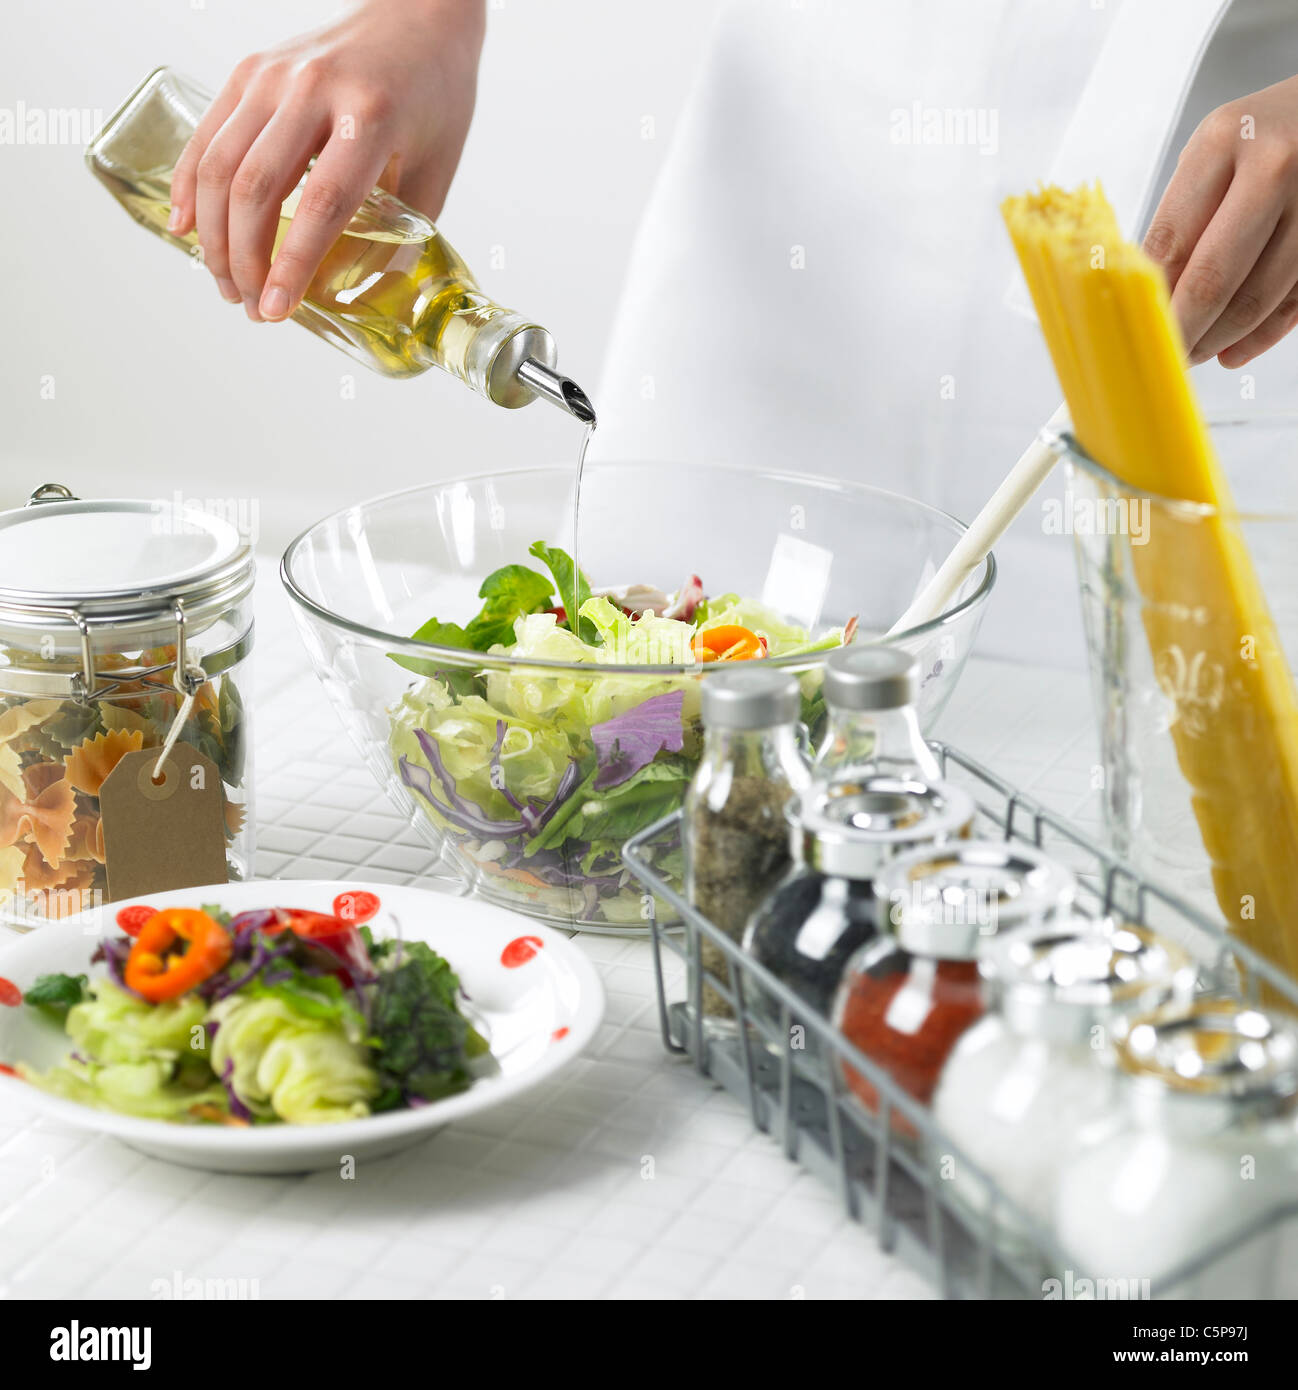 A person making salads Stock Photo